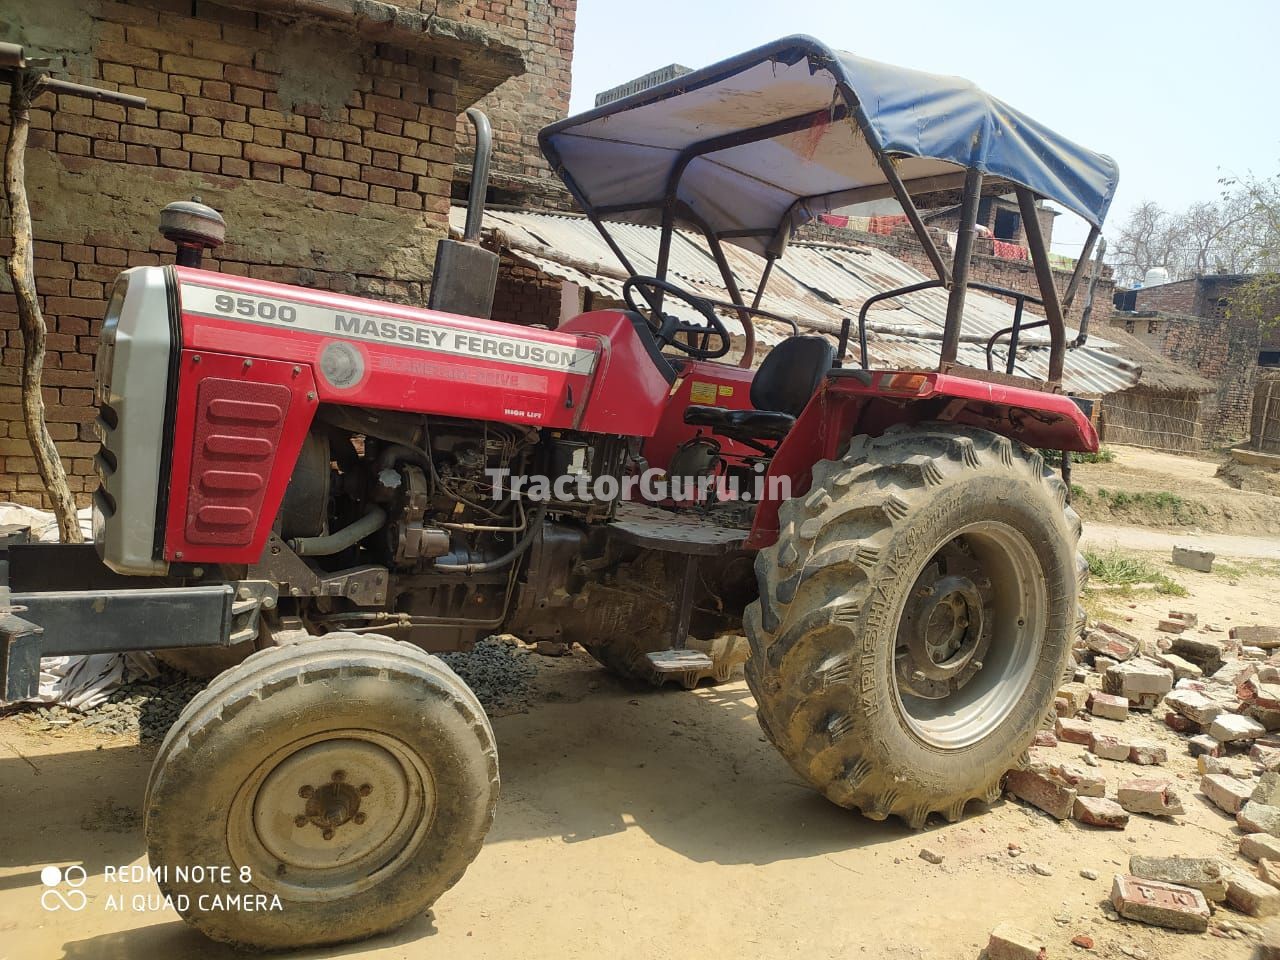 Get Second Hand Massey Ferguson 9500 DI Tractor in Good Condition - 3903